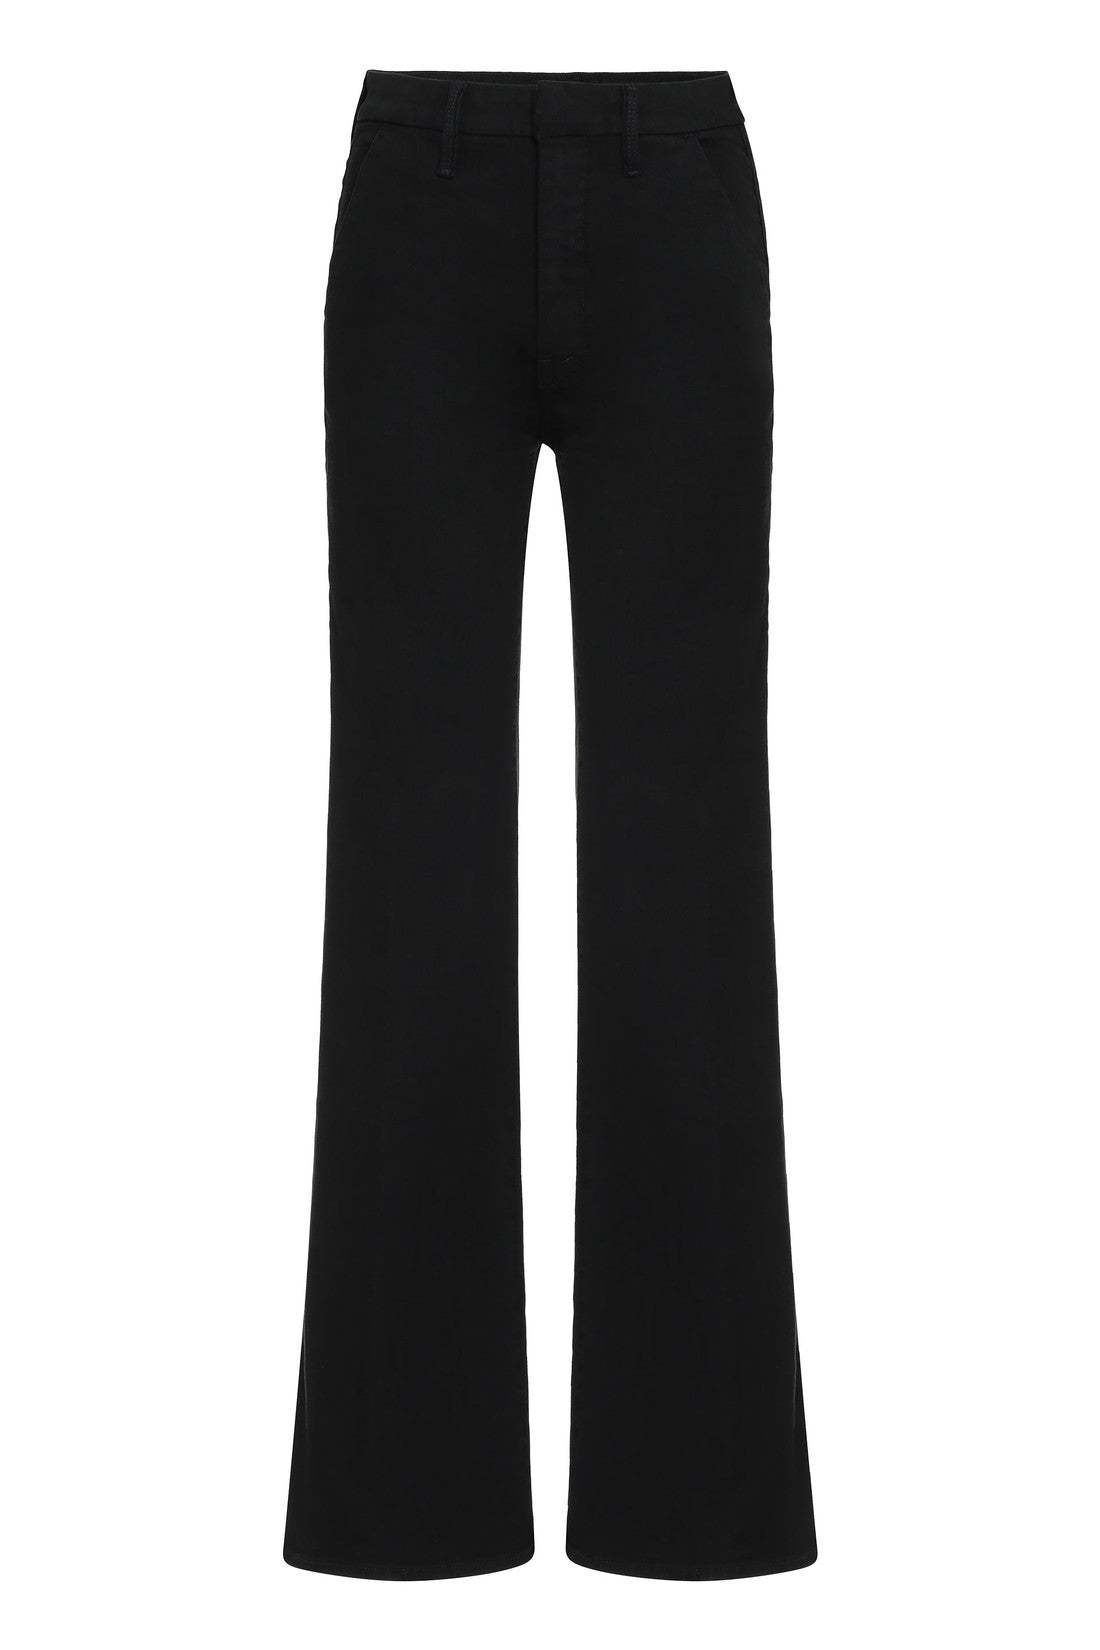 Mother-OUTLET-SALE-The Roller Prep flared trousers-ARCHIVIST